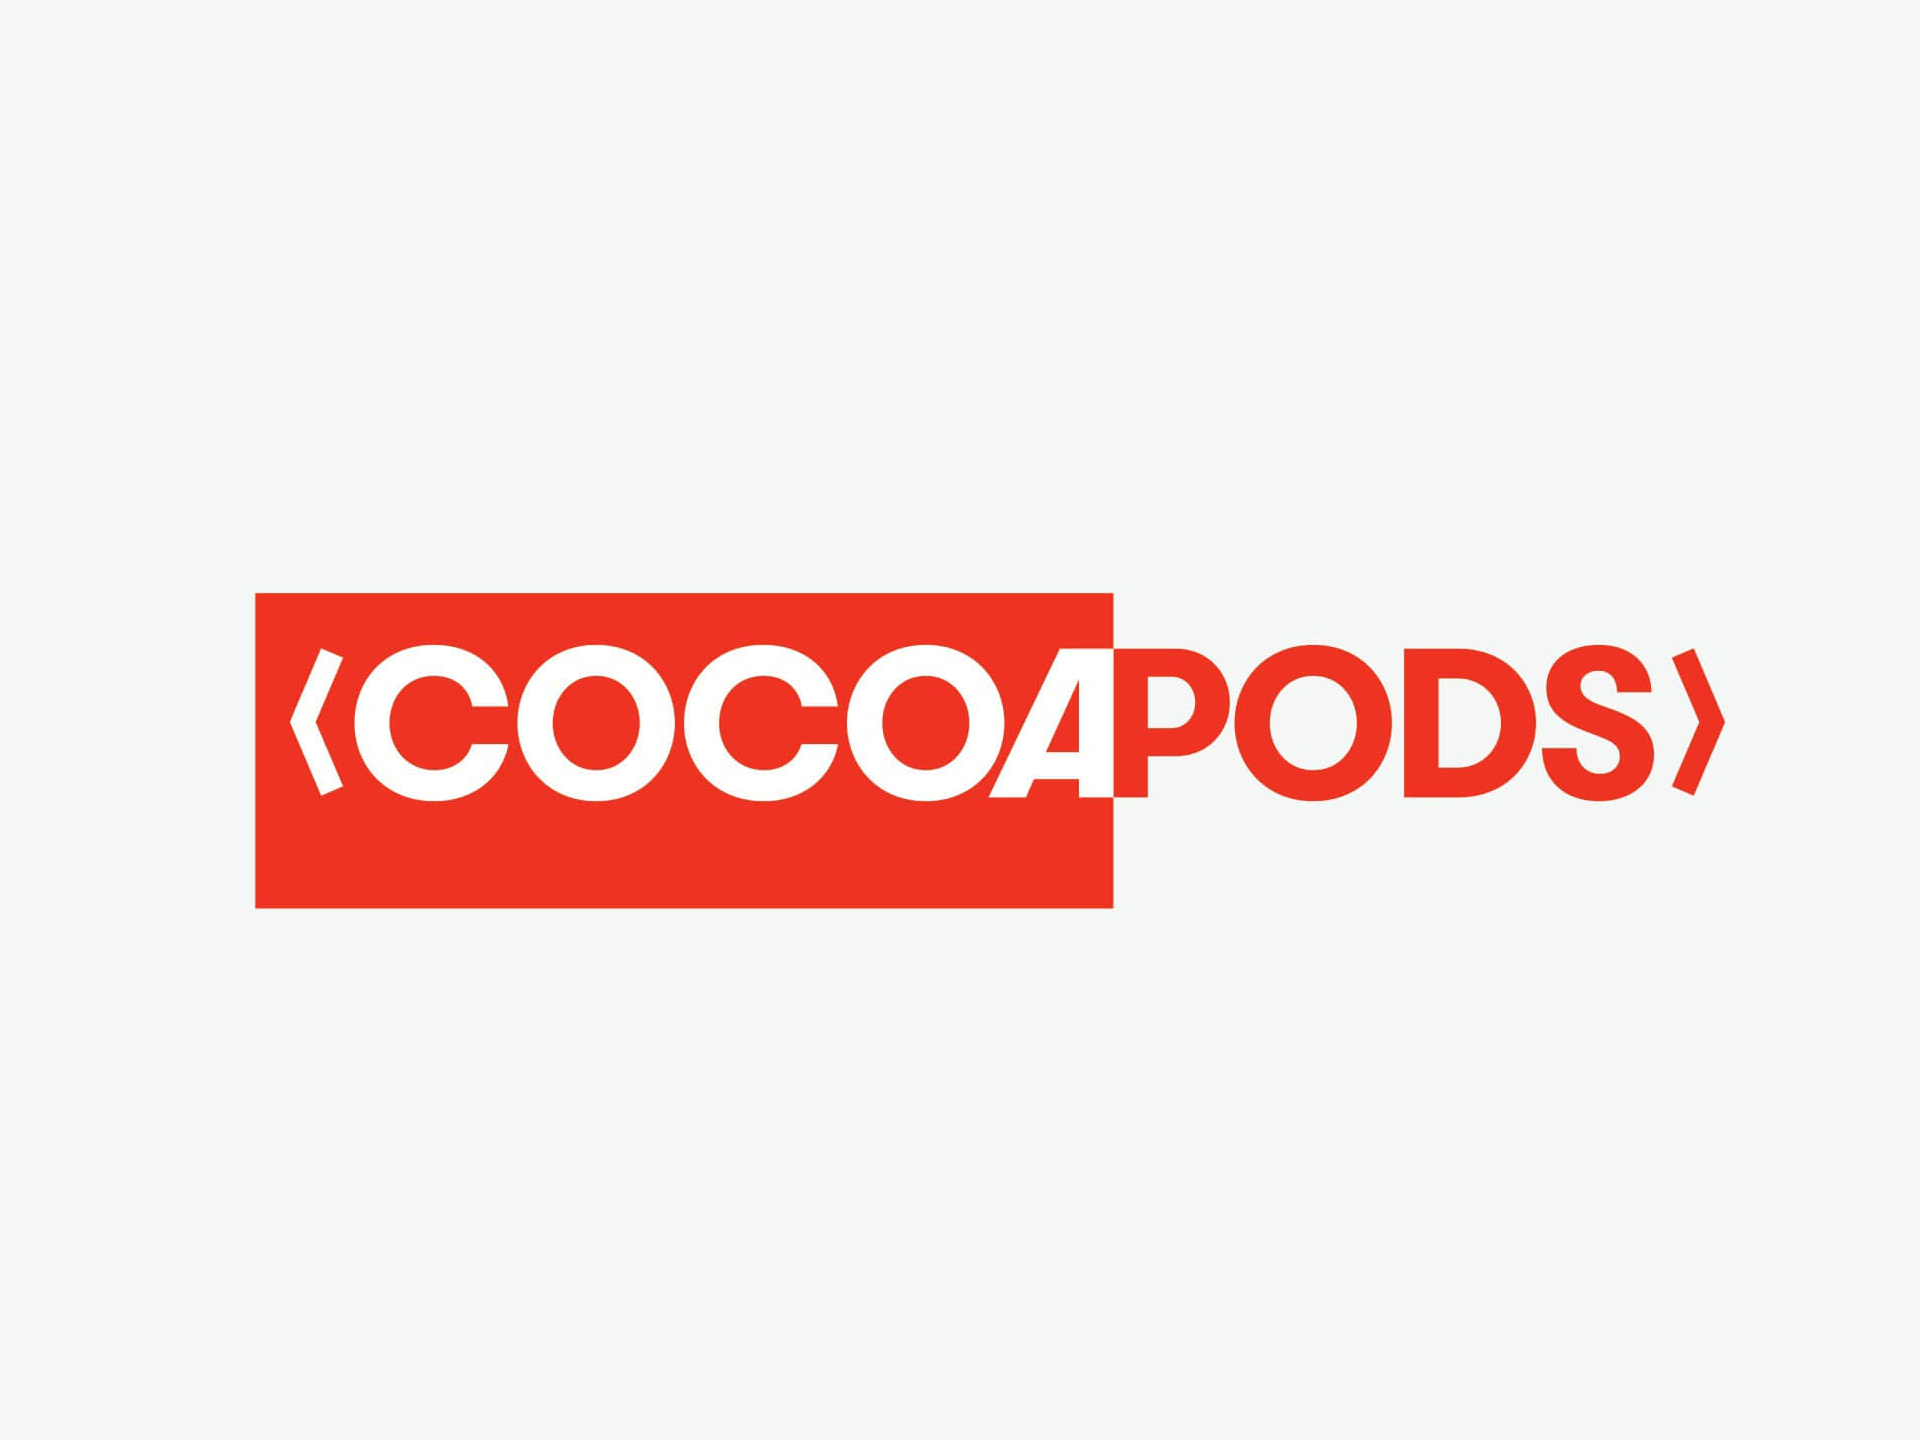 How to fix CocoaPods not installed error on Mac